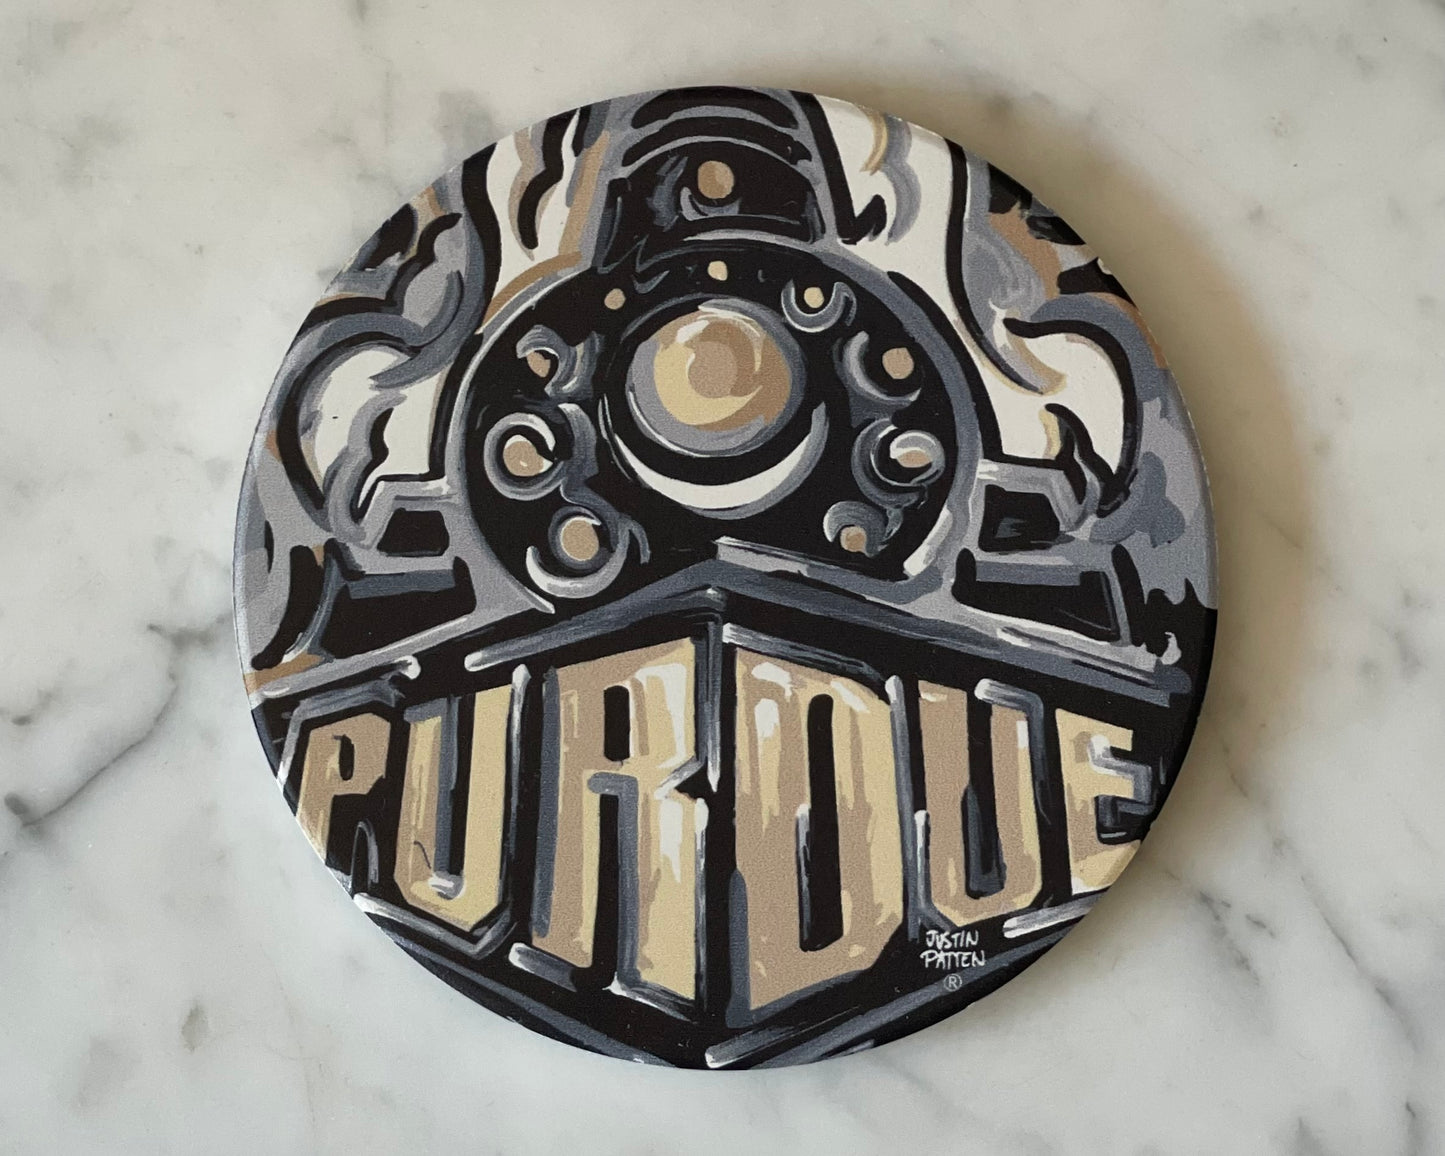 Purdue Boilermaker Special Stone Coaster by Justin Patten